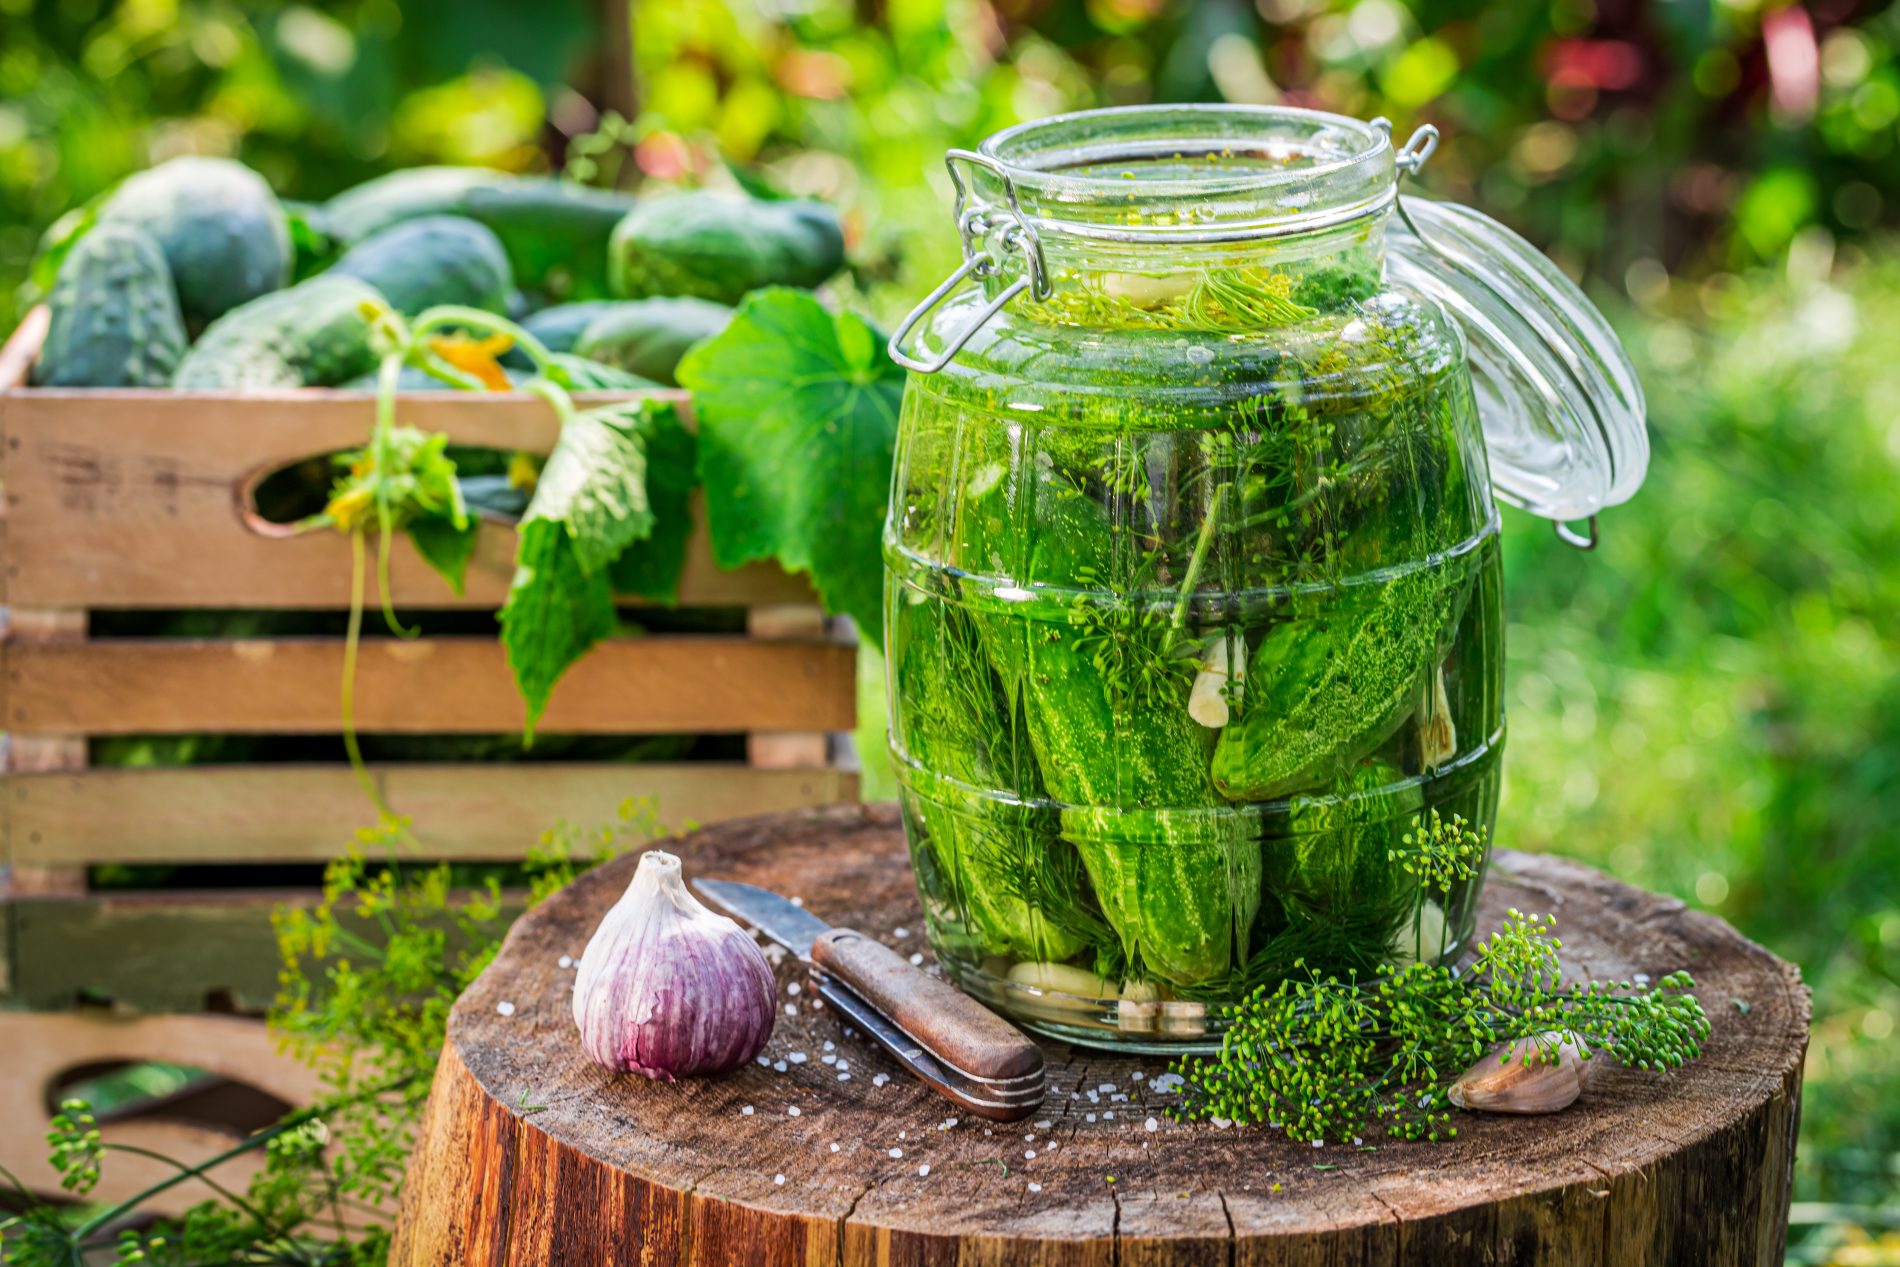 Cucumber: properties, nutritional values, benefits and uses in cooking and beauty